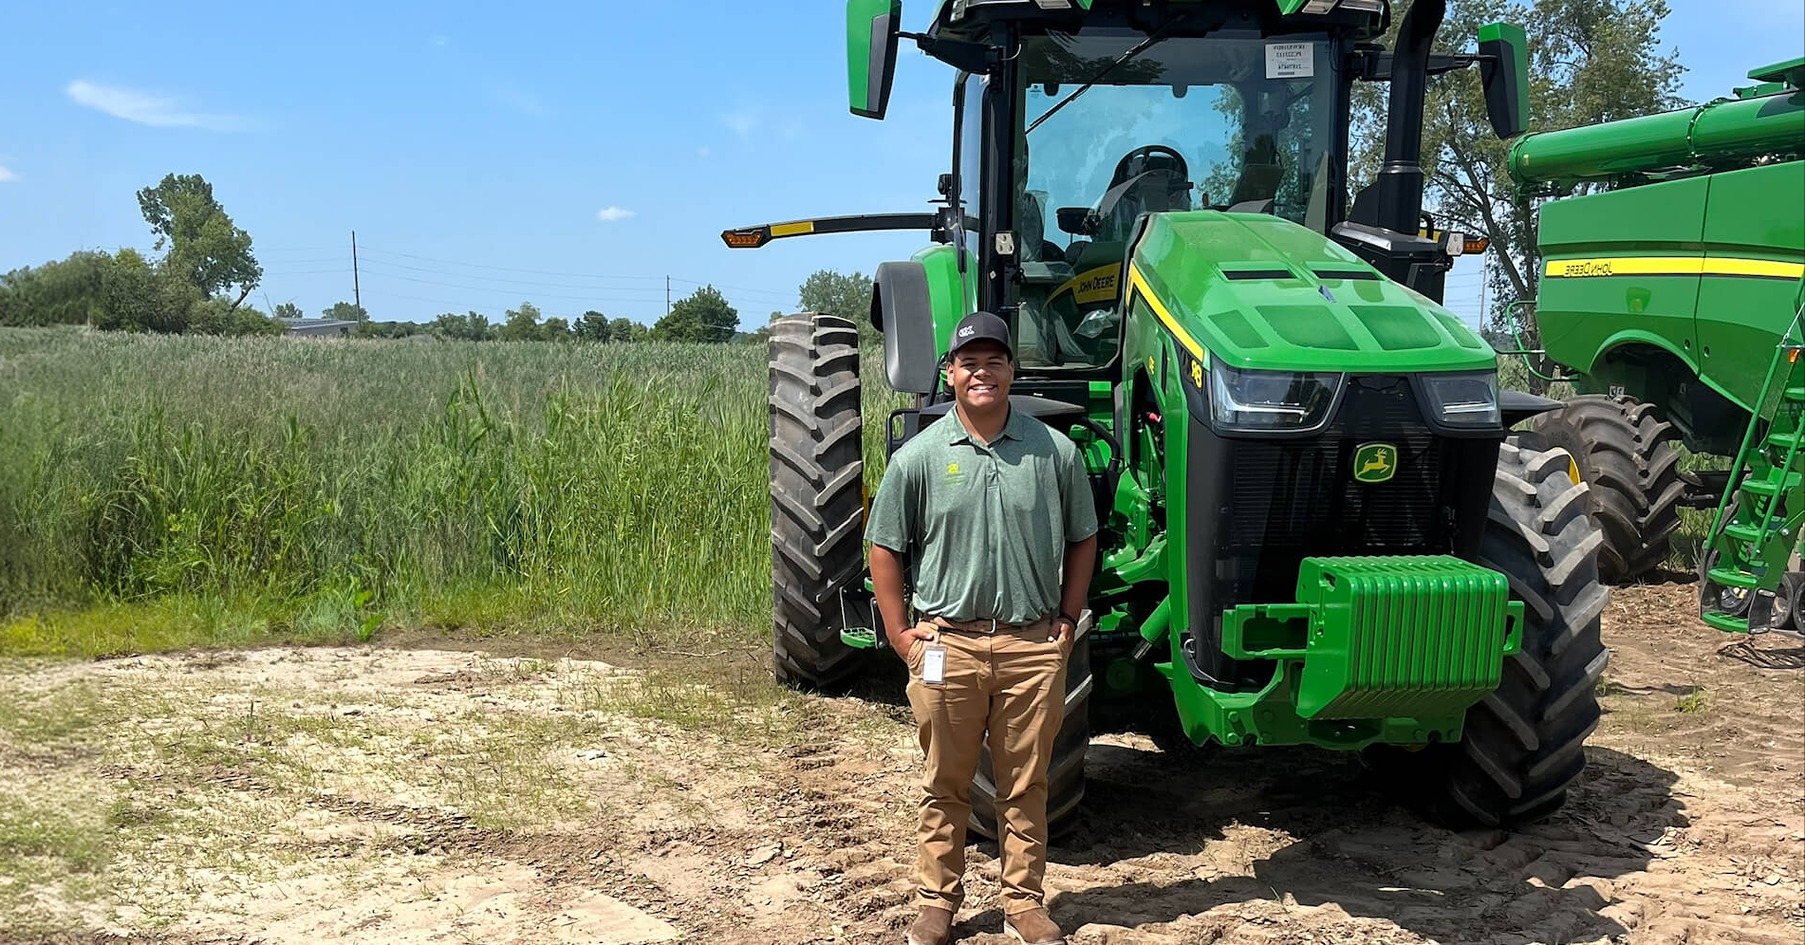 Drew Parker stands in front of a John Deere Tractor in a field.